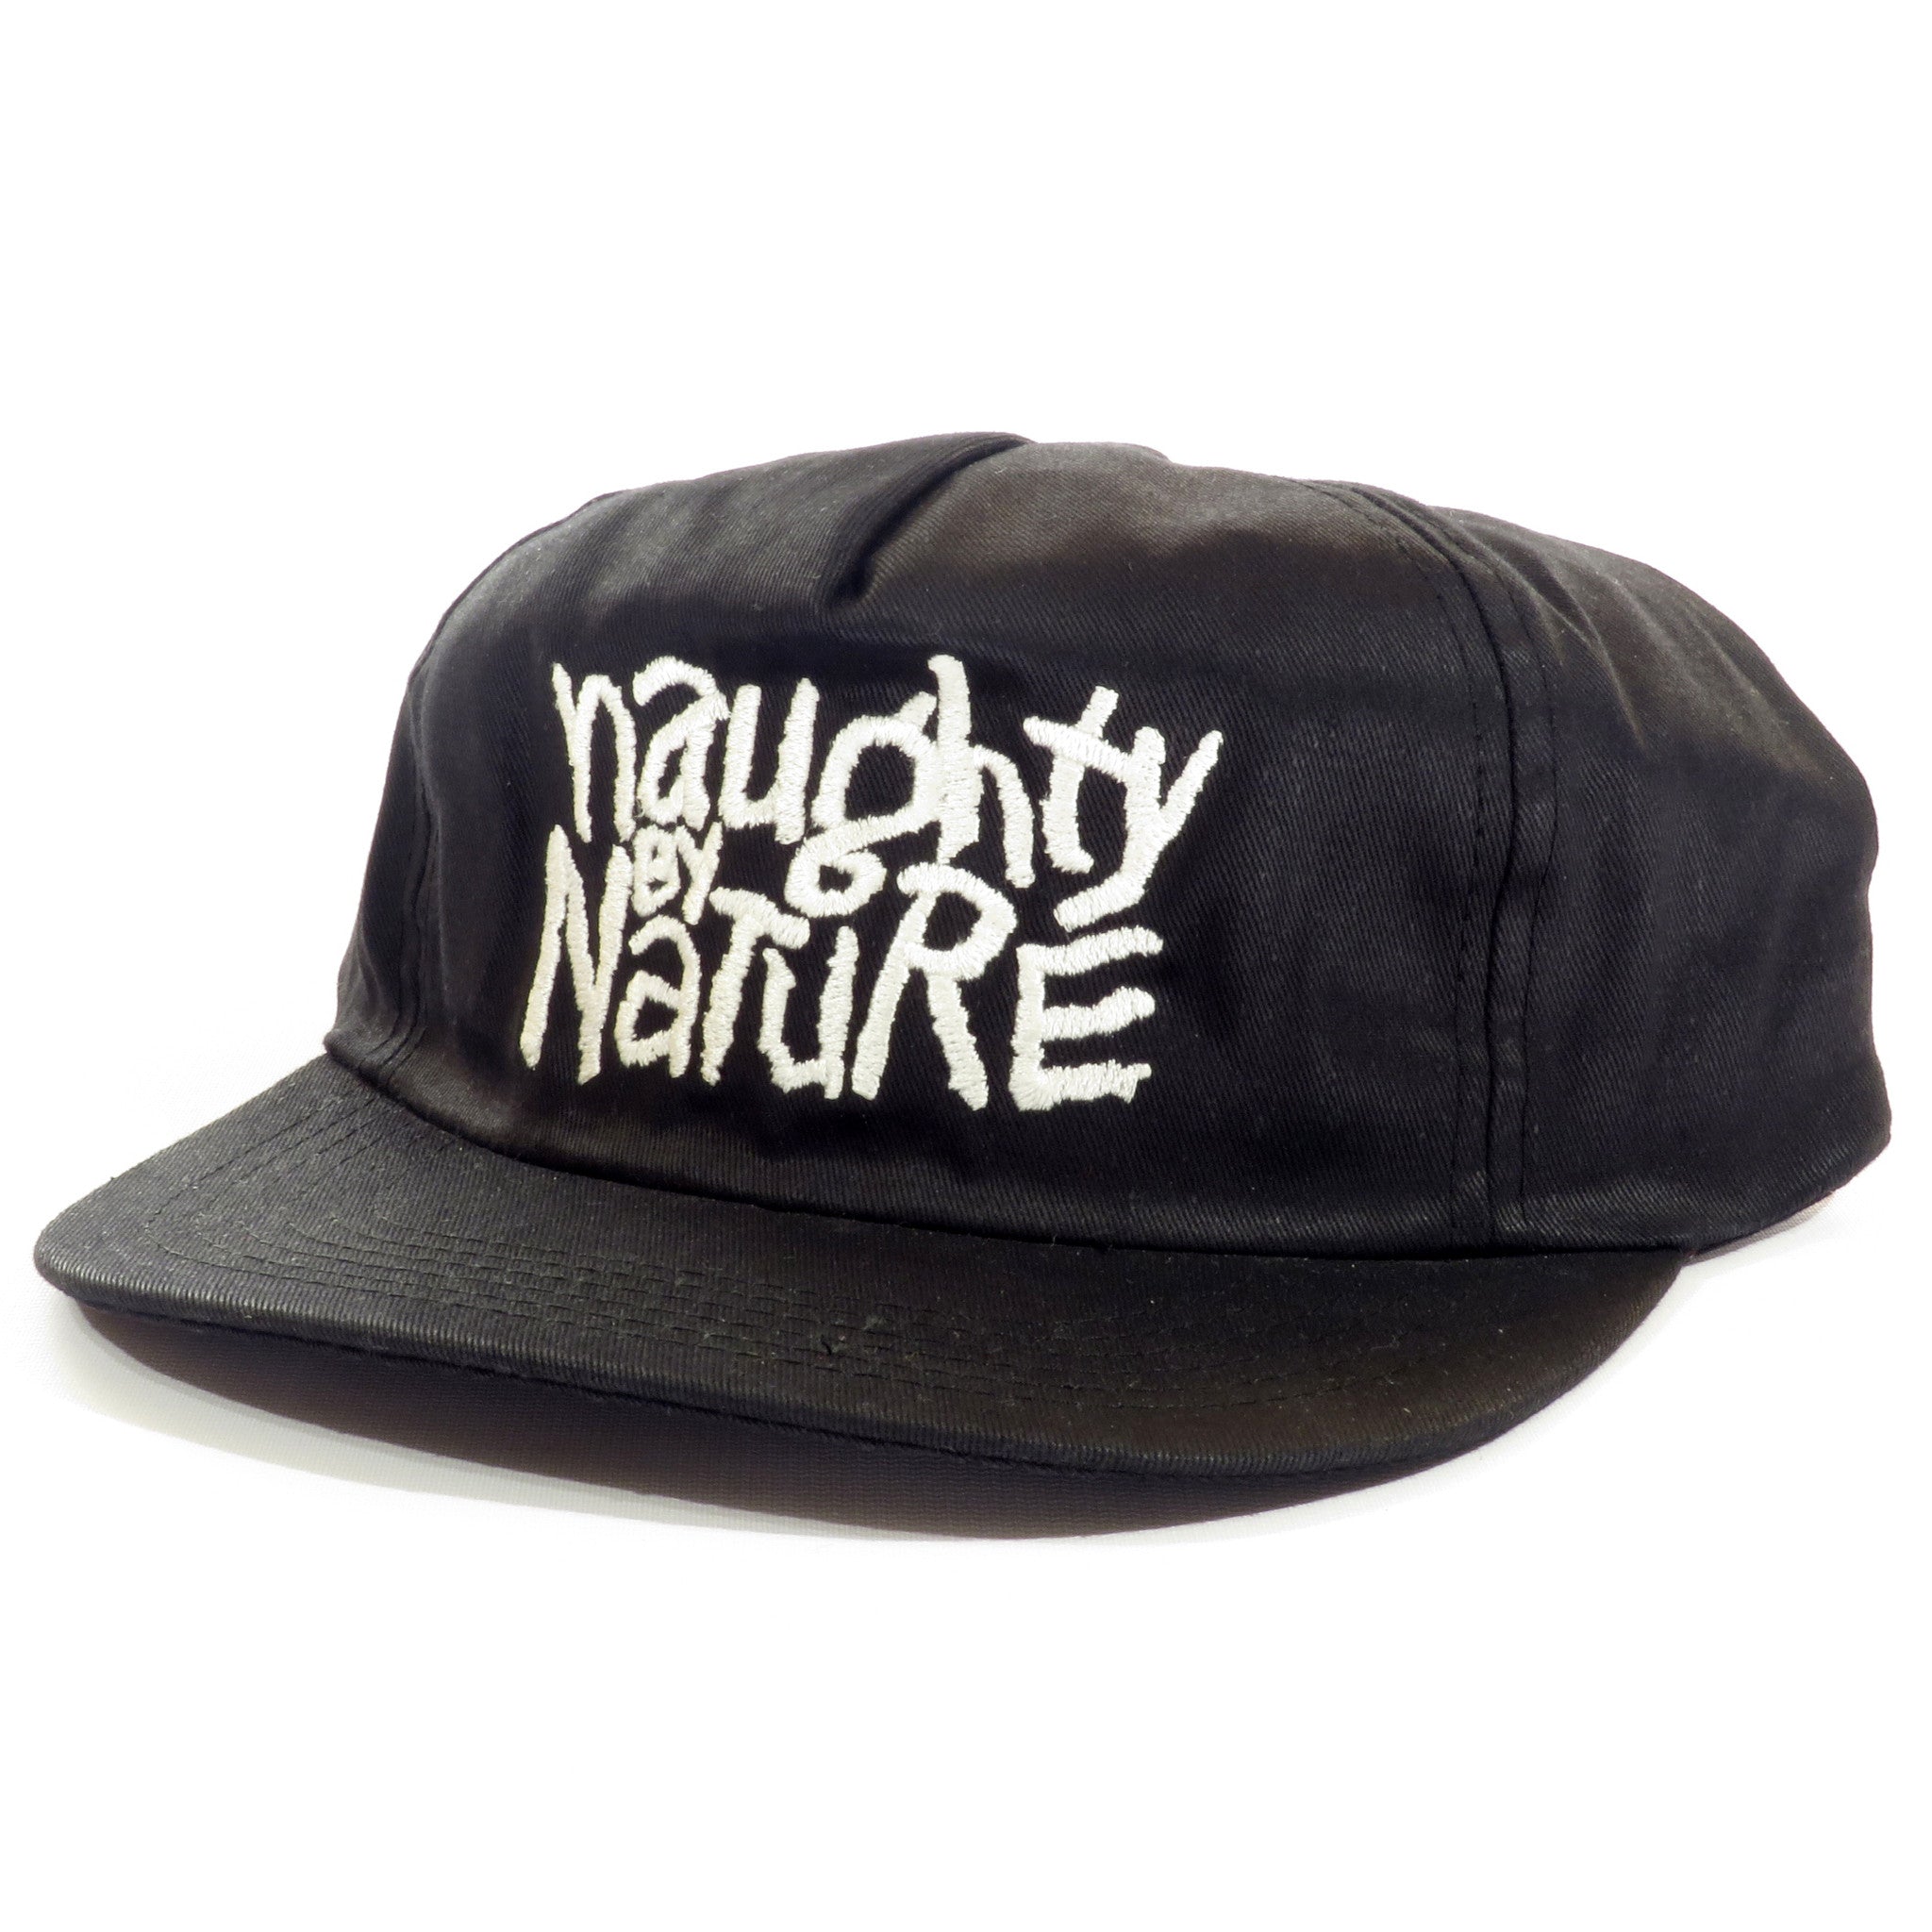 Naughty By Nature Snapback Hat